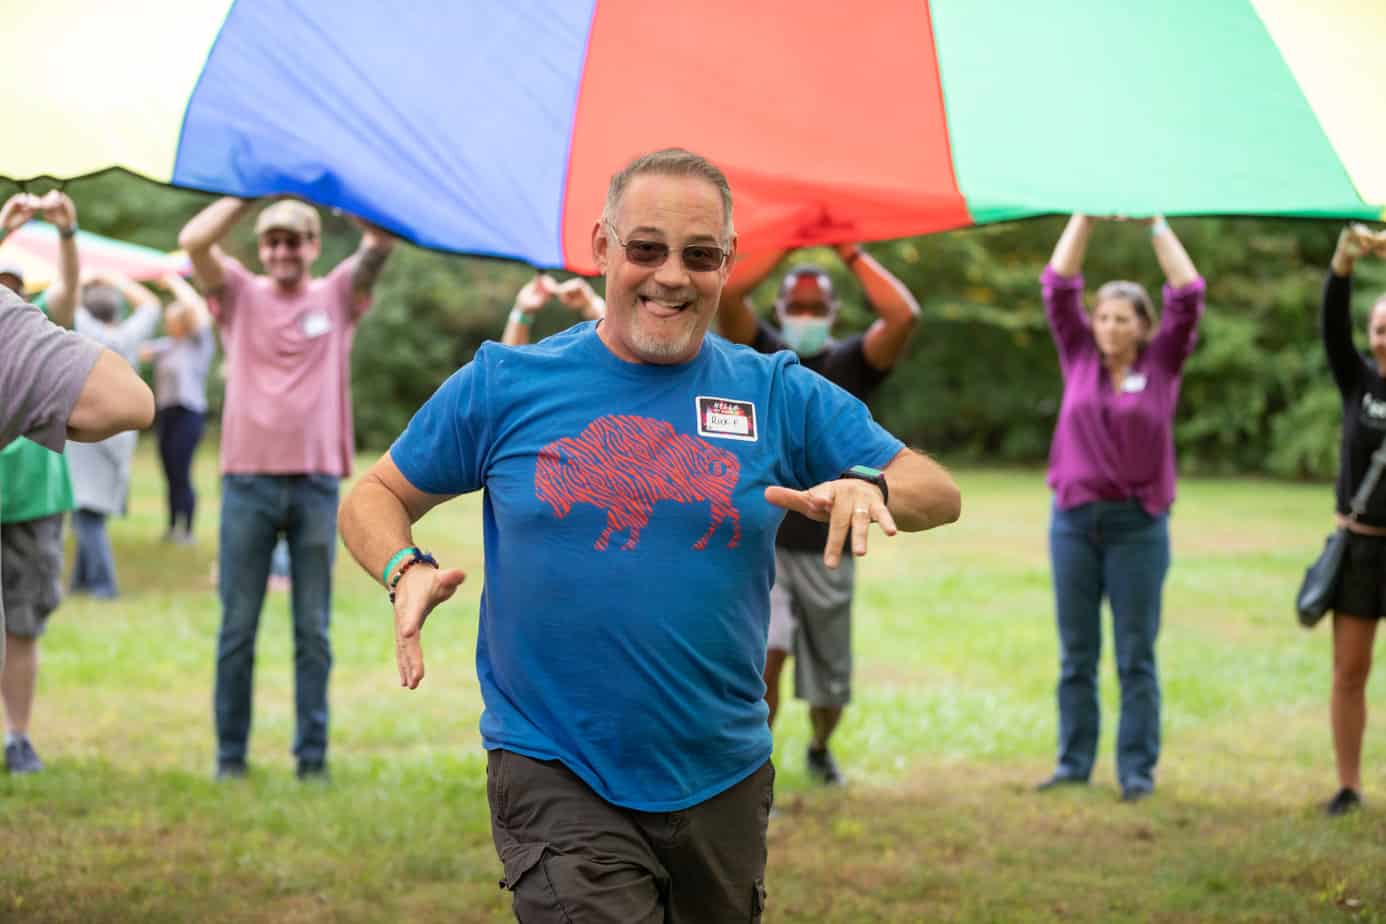 A happy man playing parachute lawn games at Mountainside addiction treatment center in Connecticut.